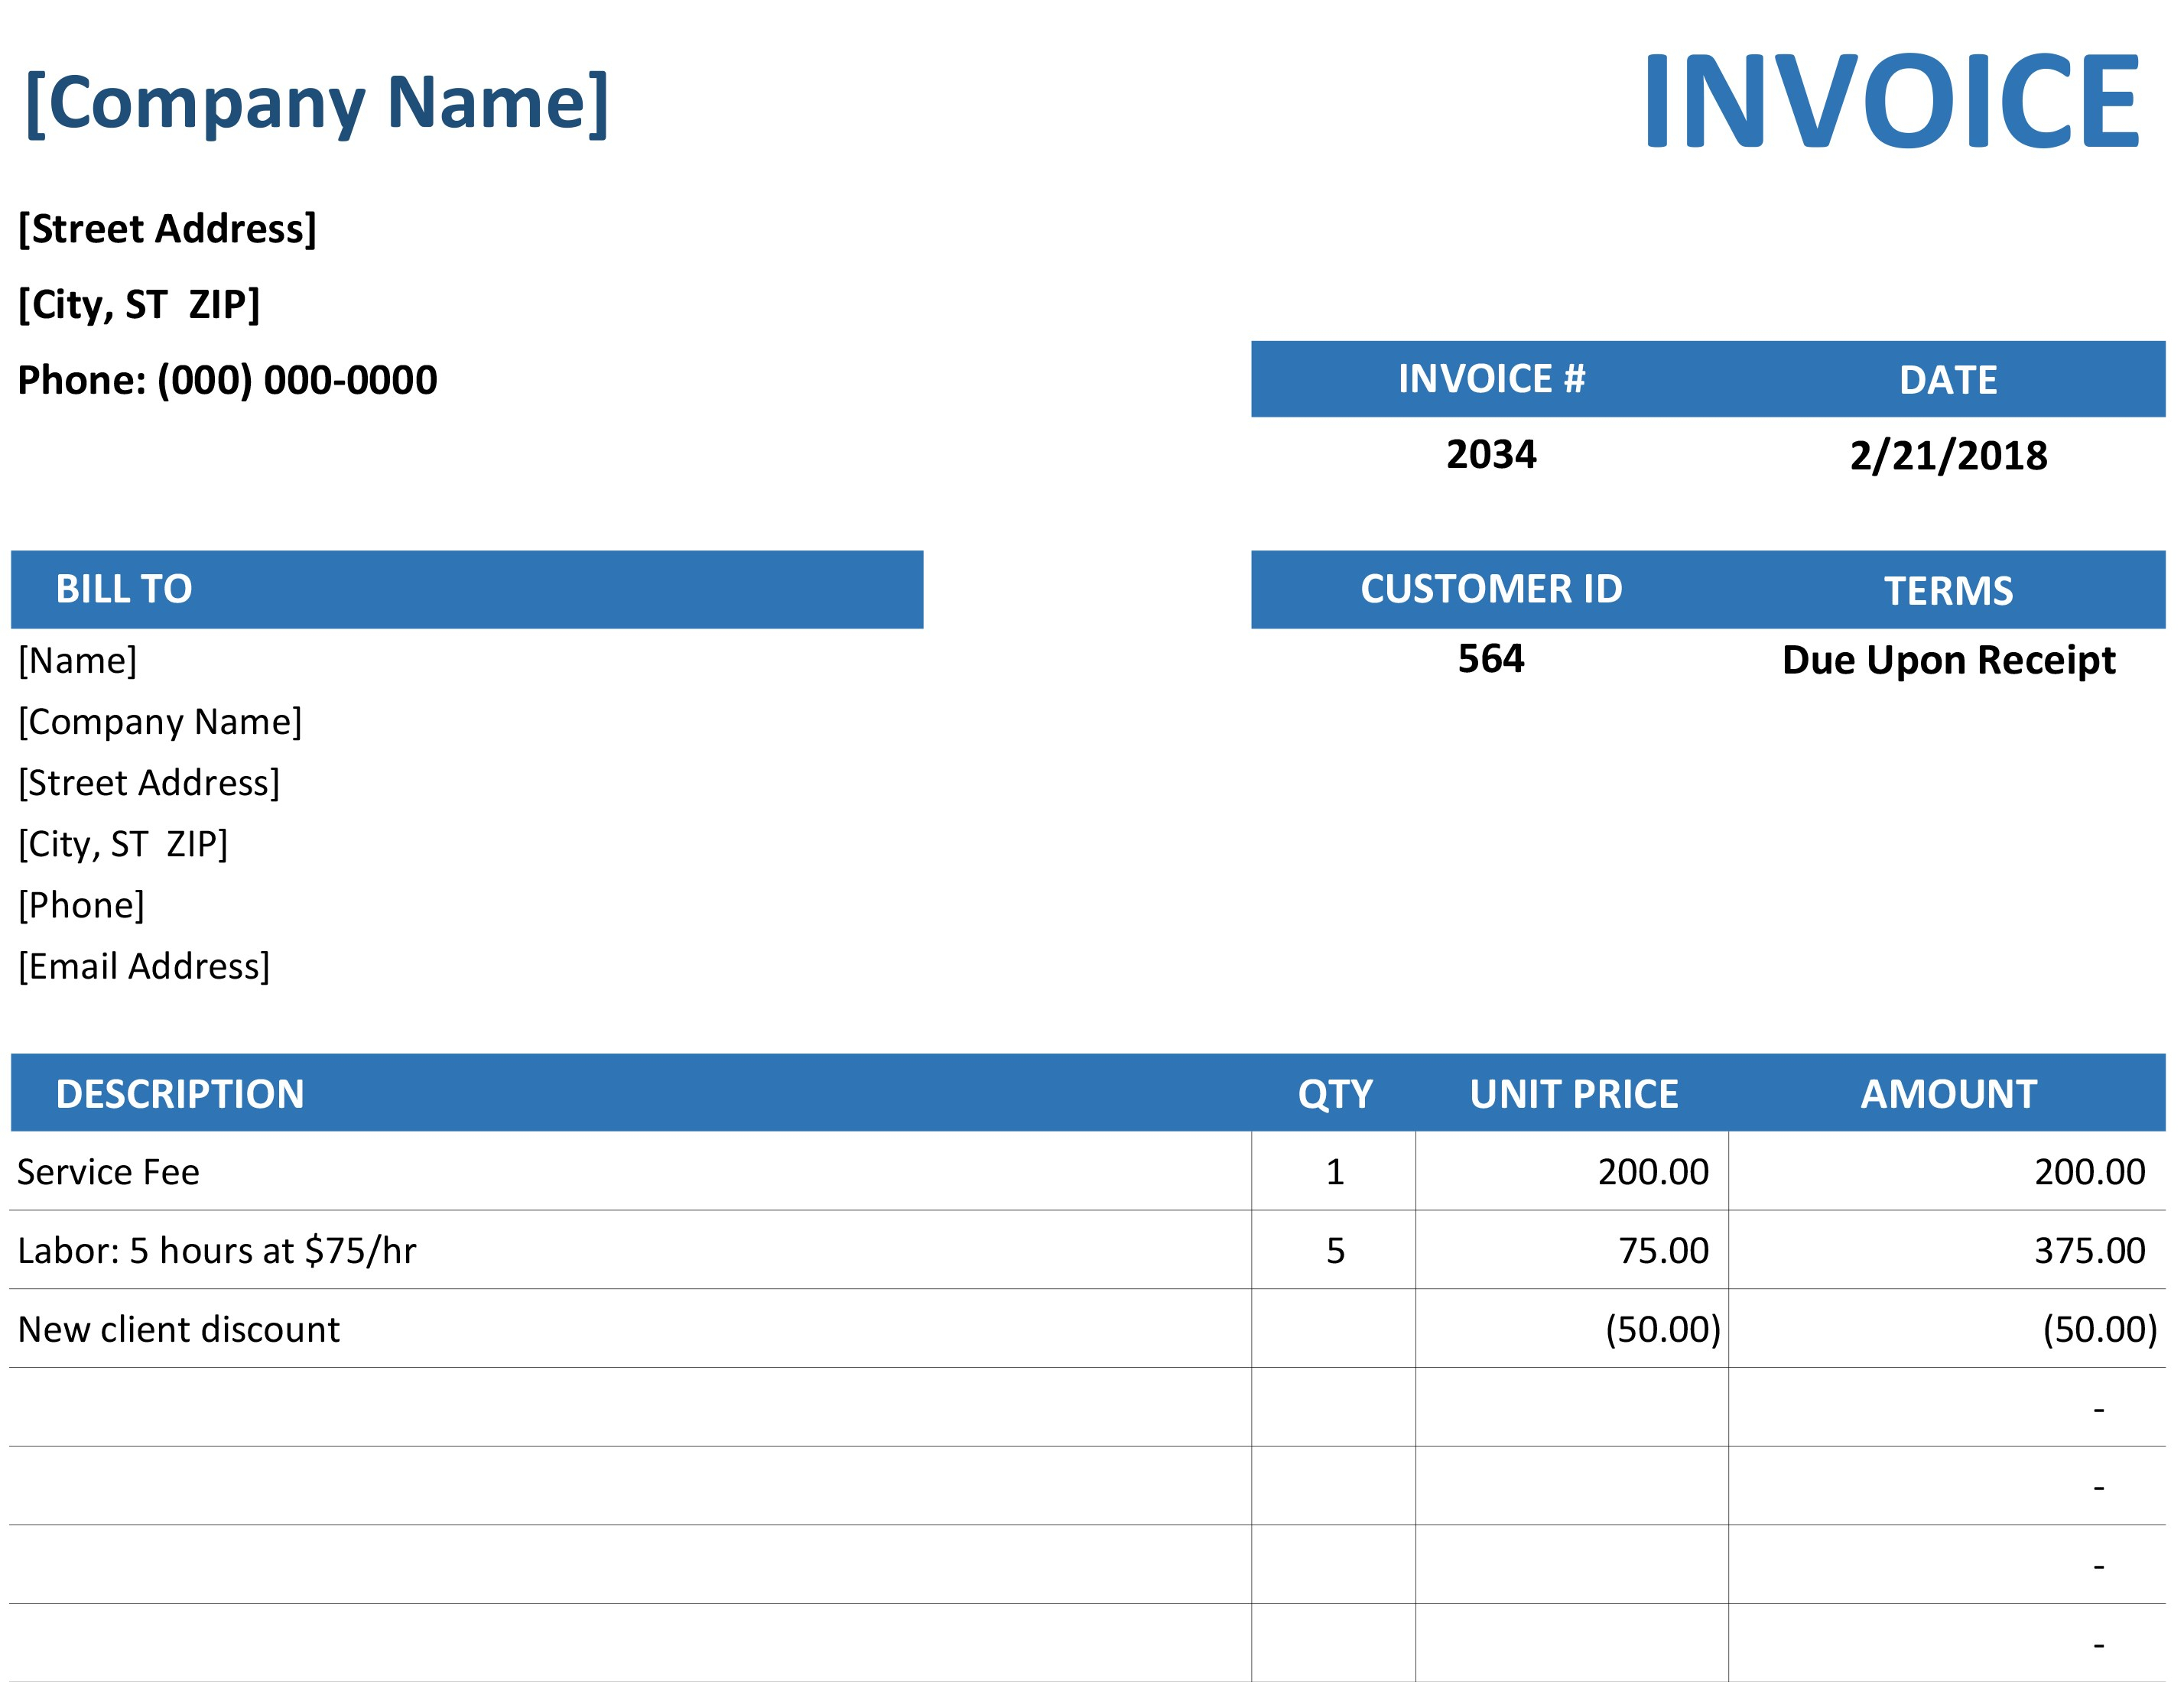 Invoice Spreadsheet Template Intended For Invoices  Office